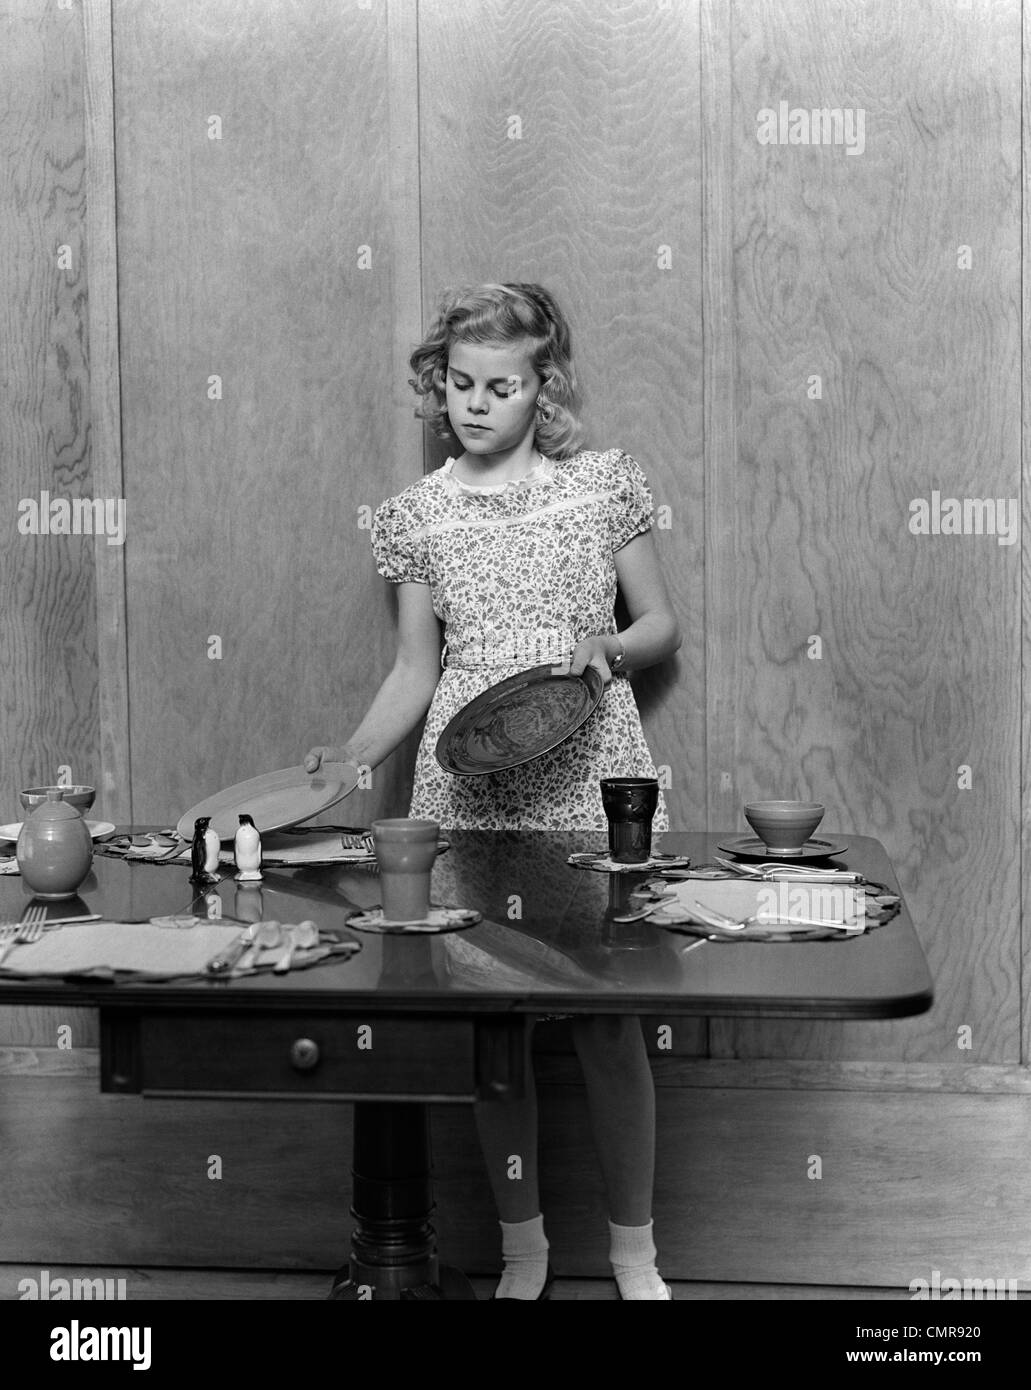 1940s BLOND PRE-TEEN YOUNG WOMAN SETTING TABLE Stock Photo